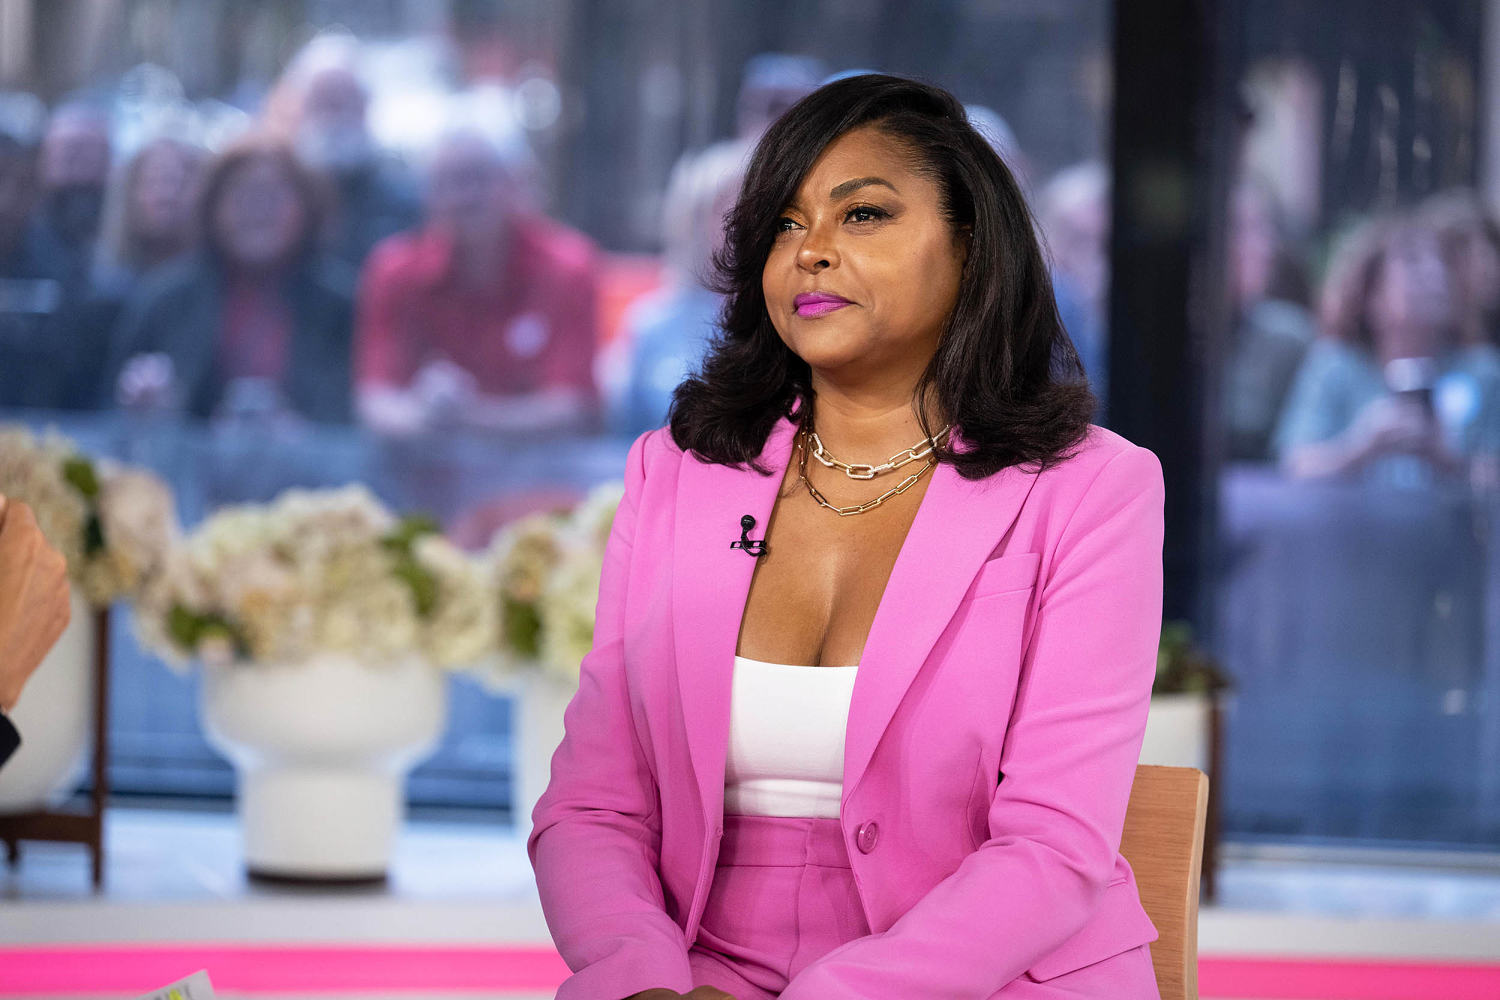 Taraji P. Henson may quit acting over getting paid a fraction of the cost